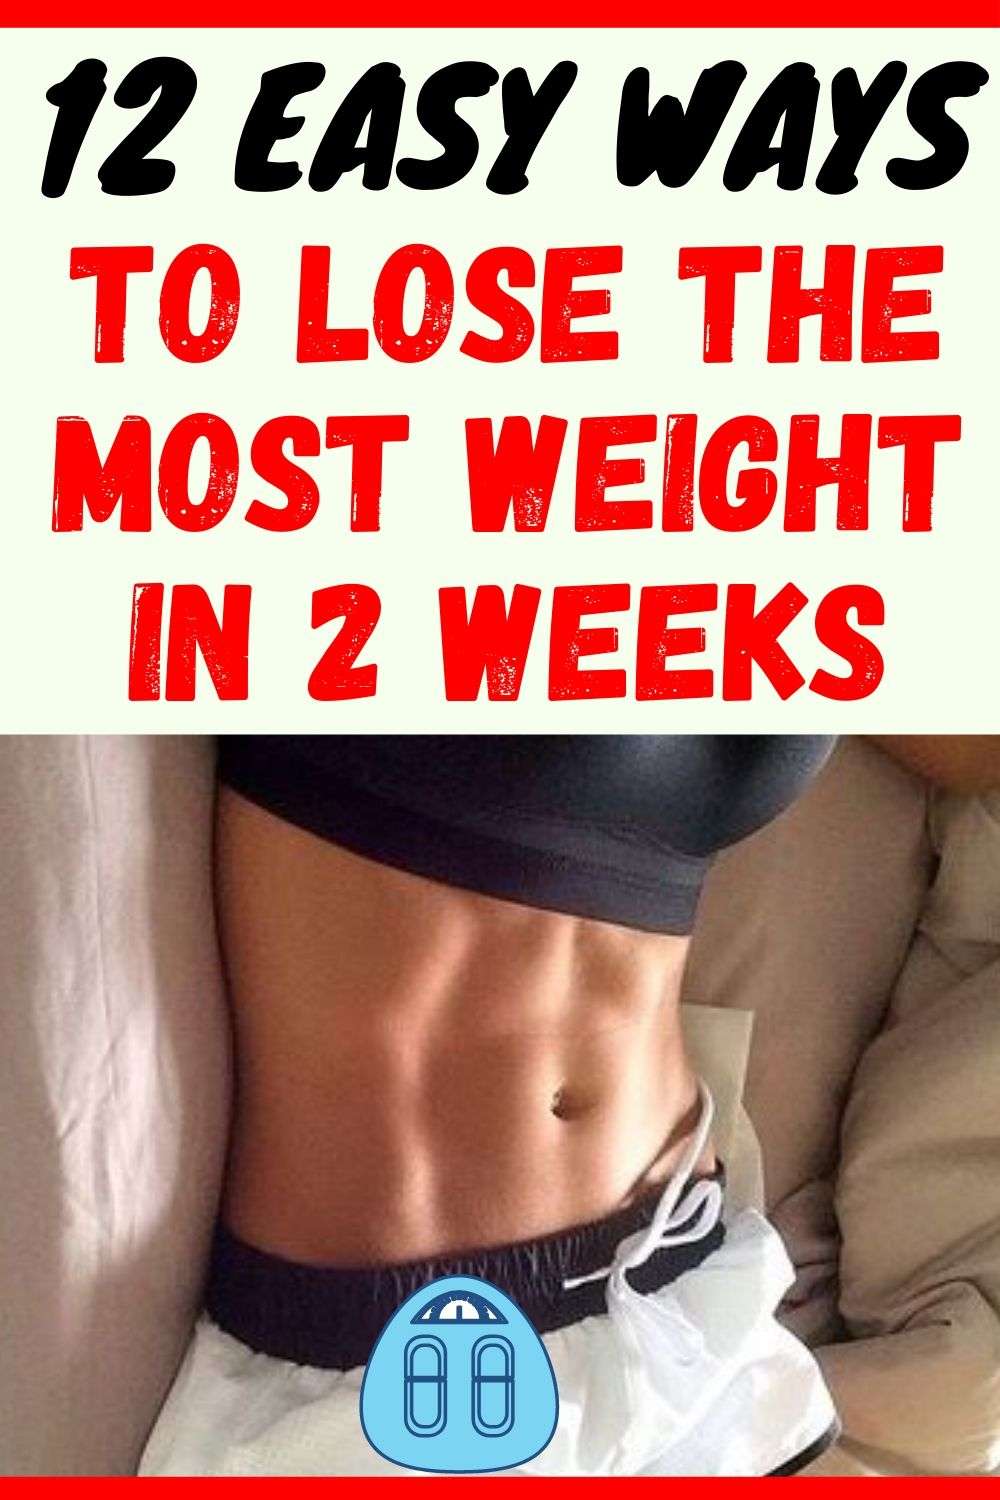 12 Easy Ways To Lose The Most Weight in 2 Weeks